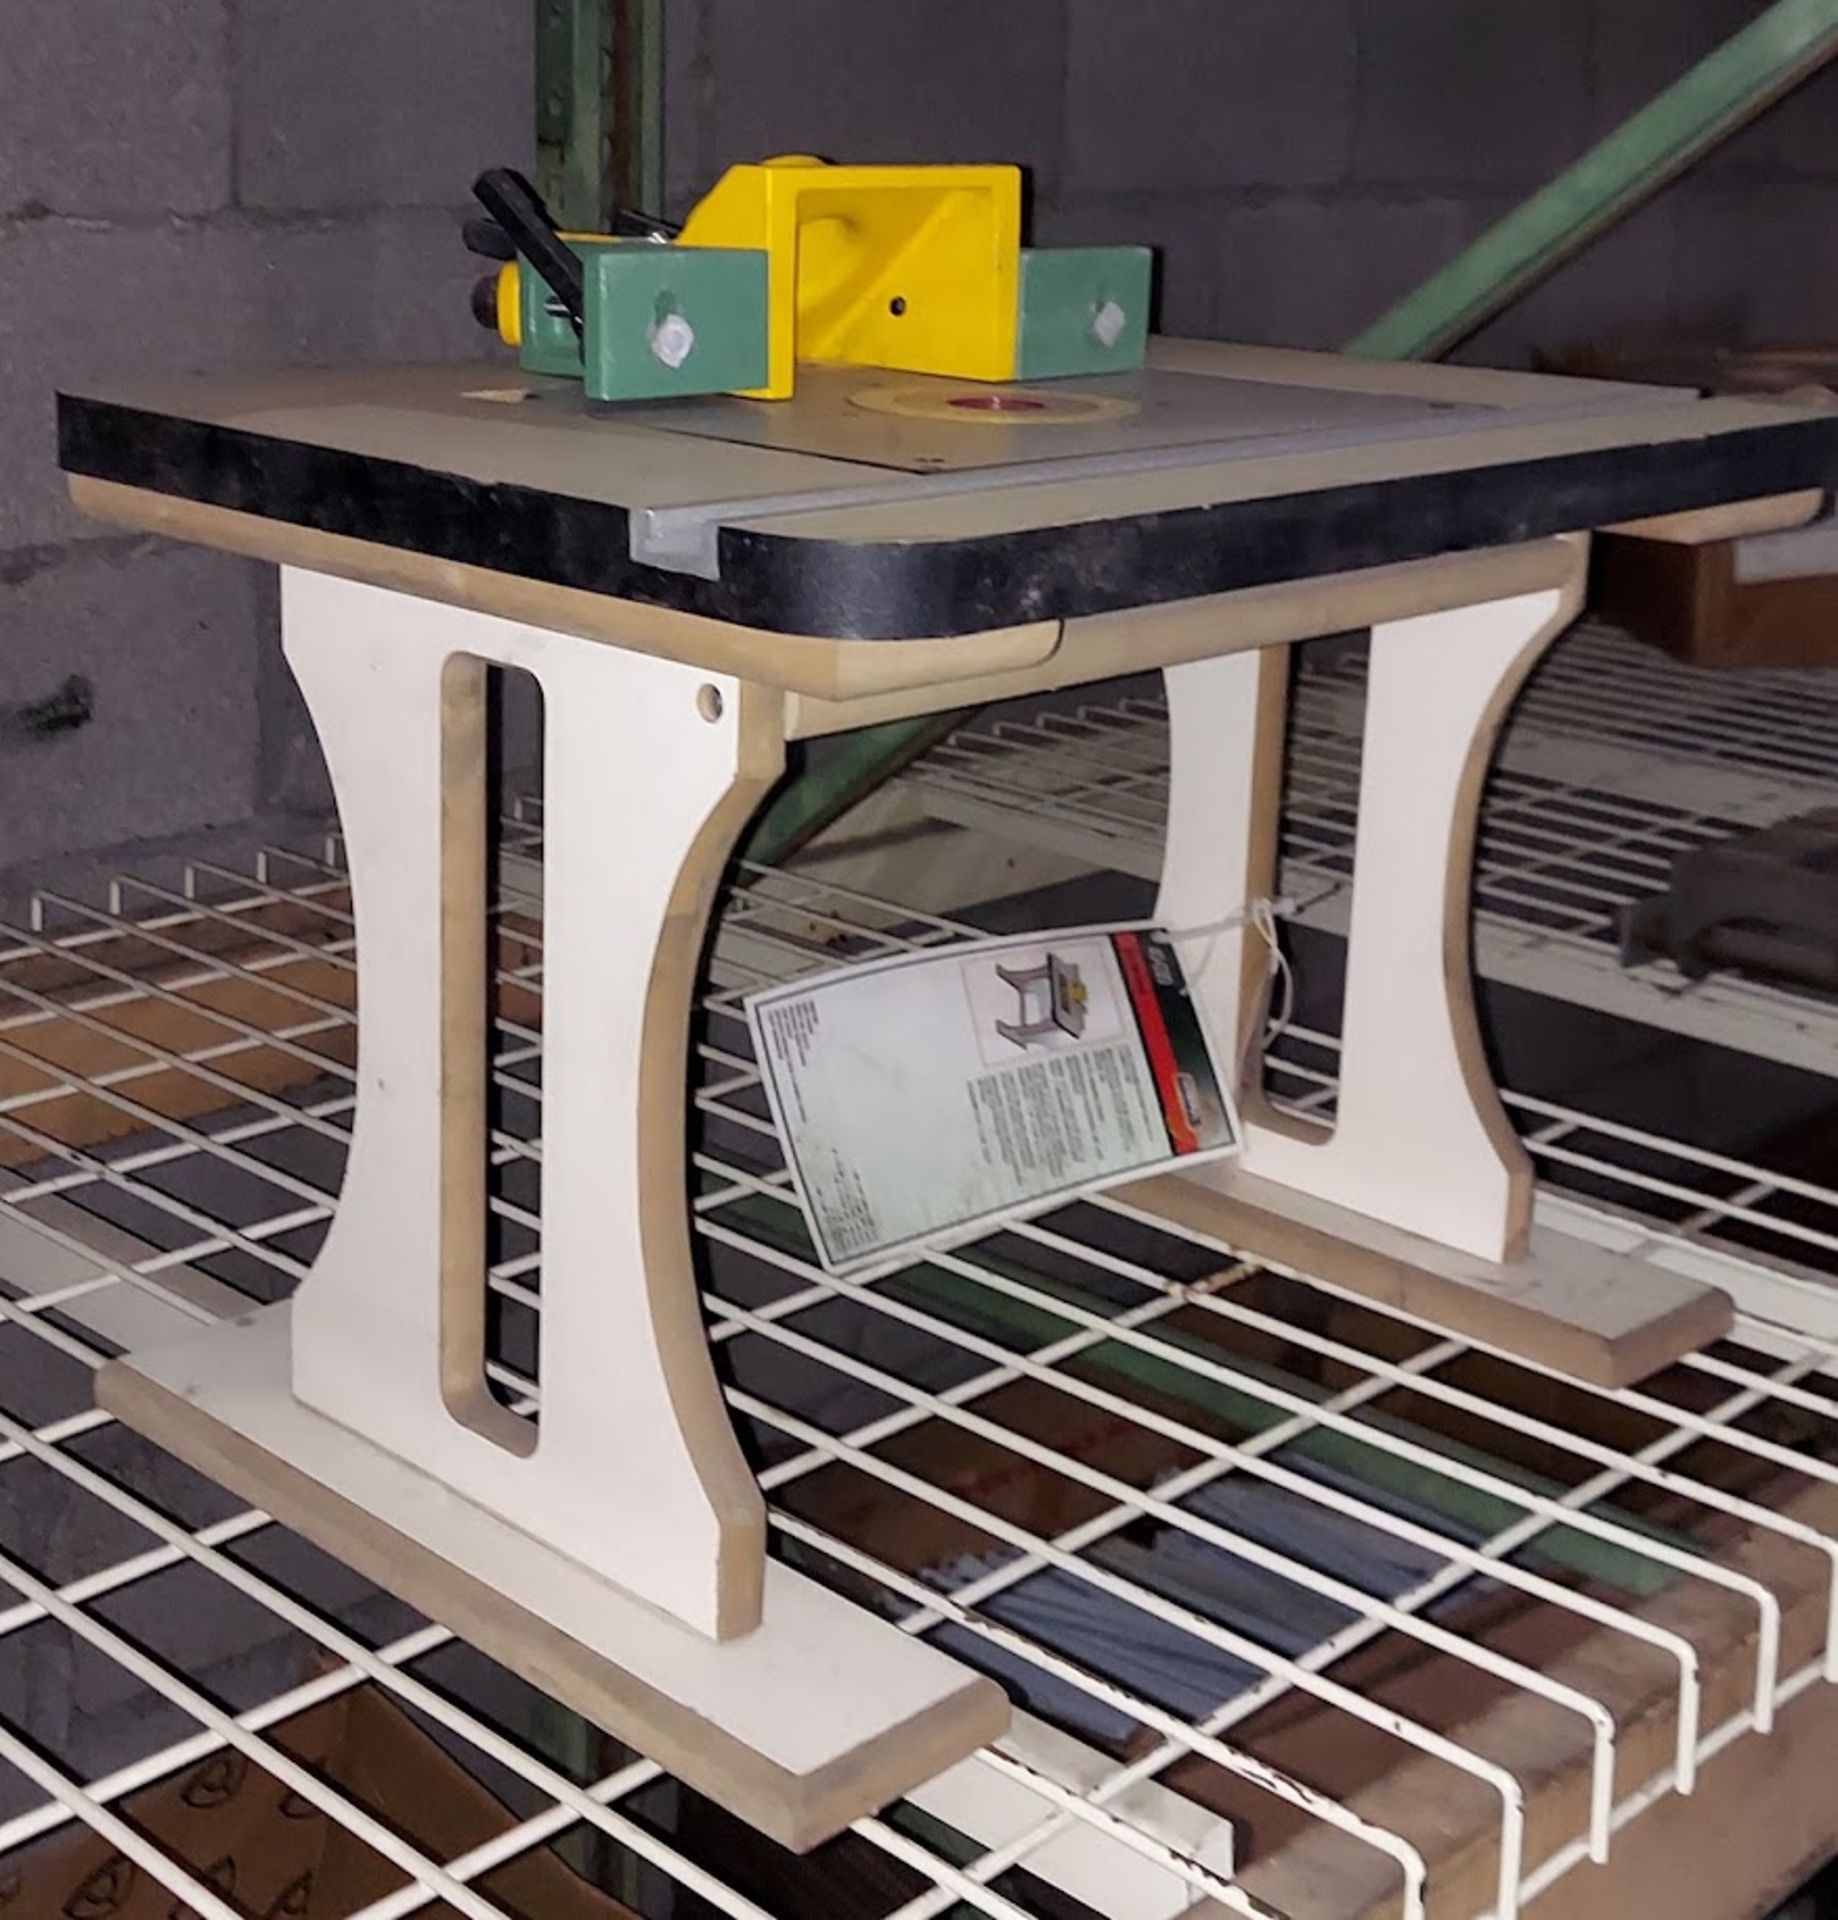 General Router Table, Model #40-030 - Image 2 of 2